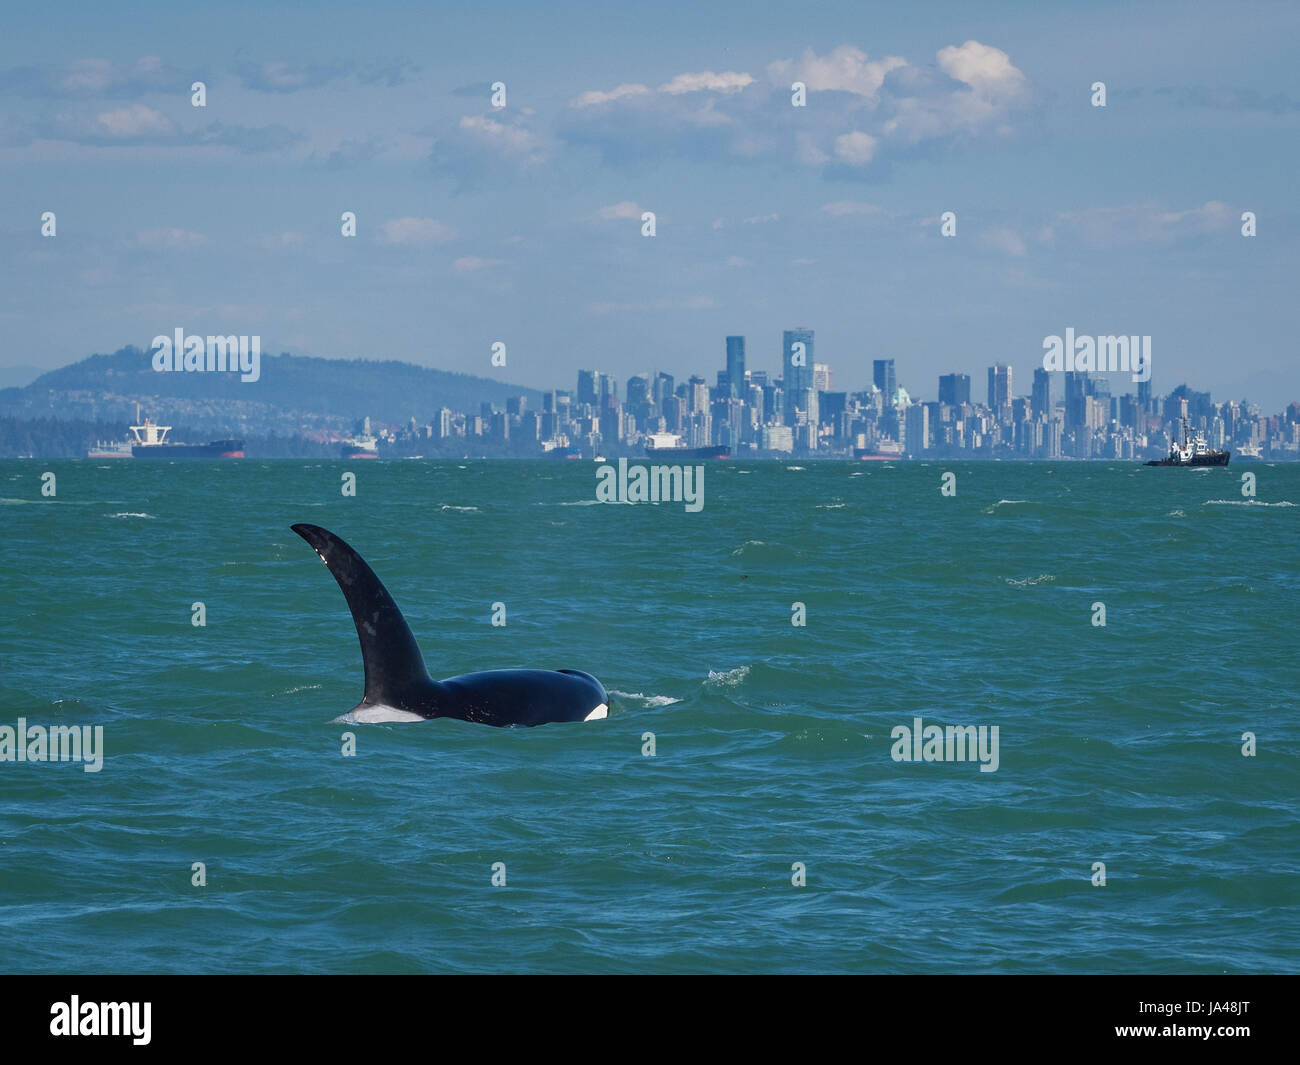 Killer whale (orca) off the city of Vancouver, Canada Stock Photo